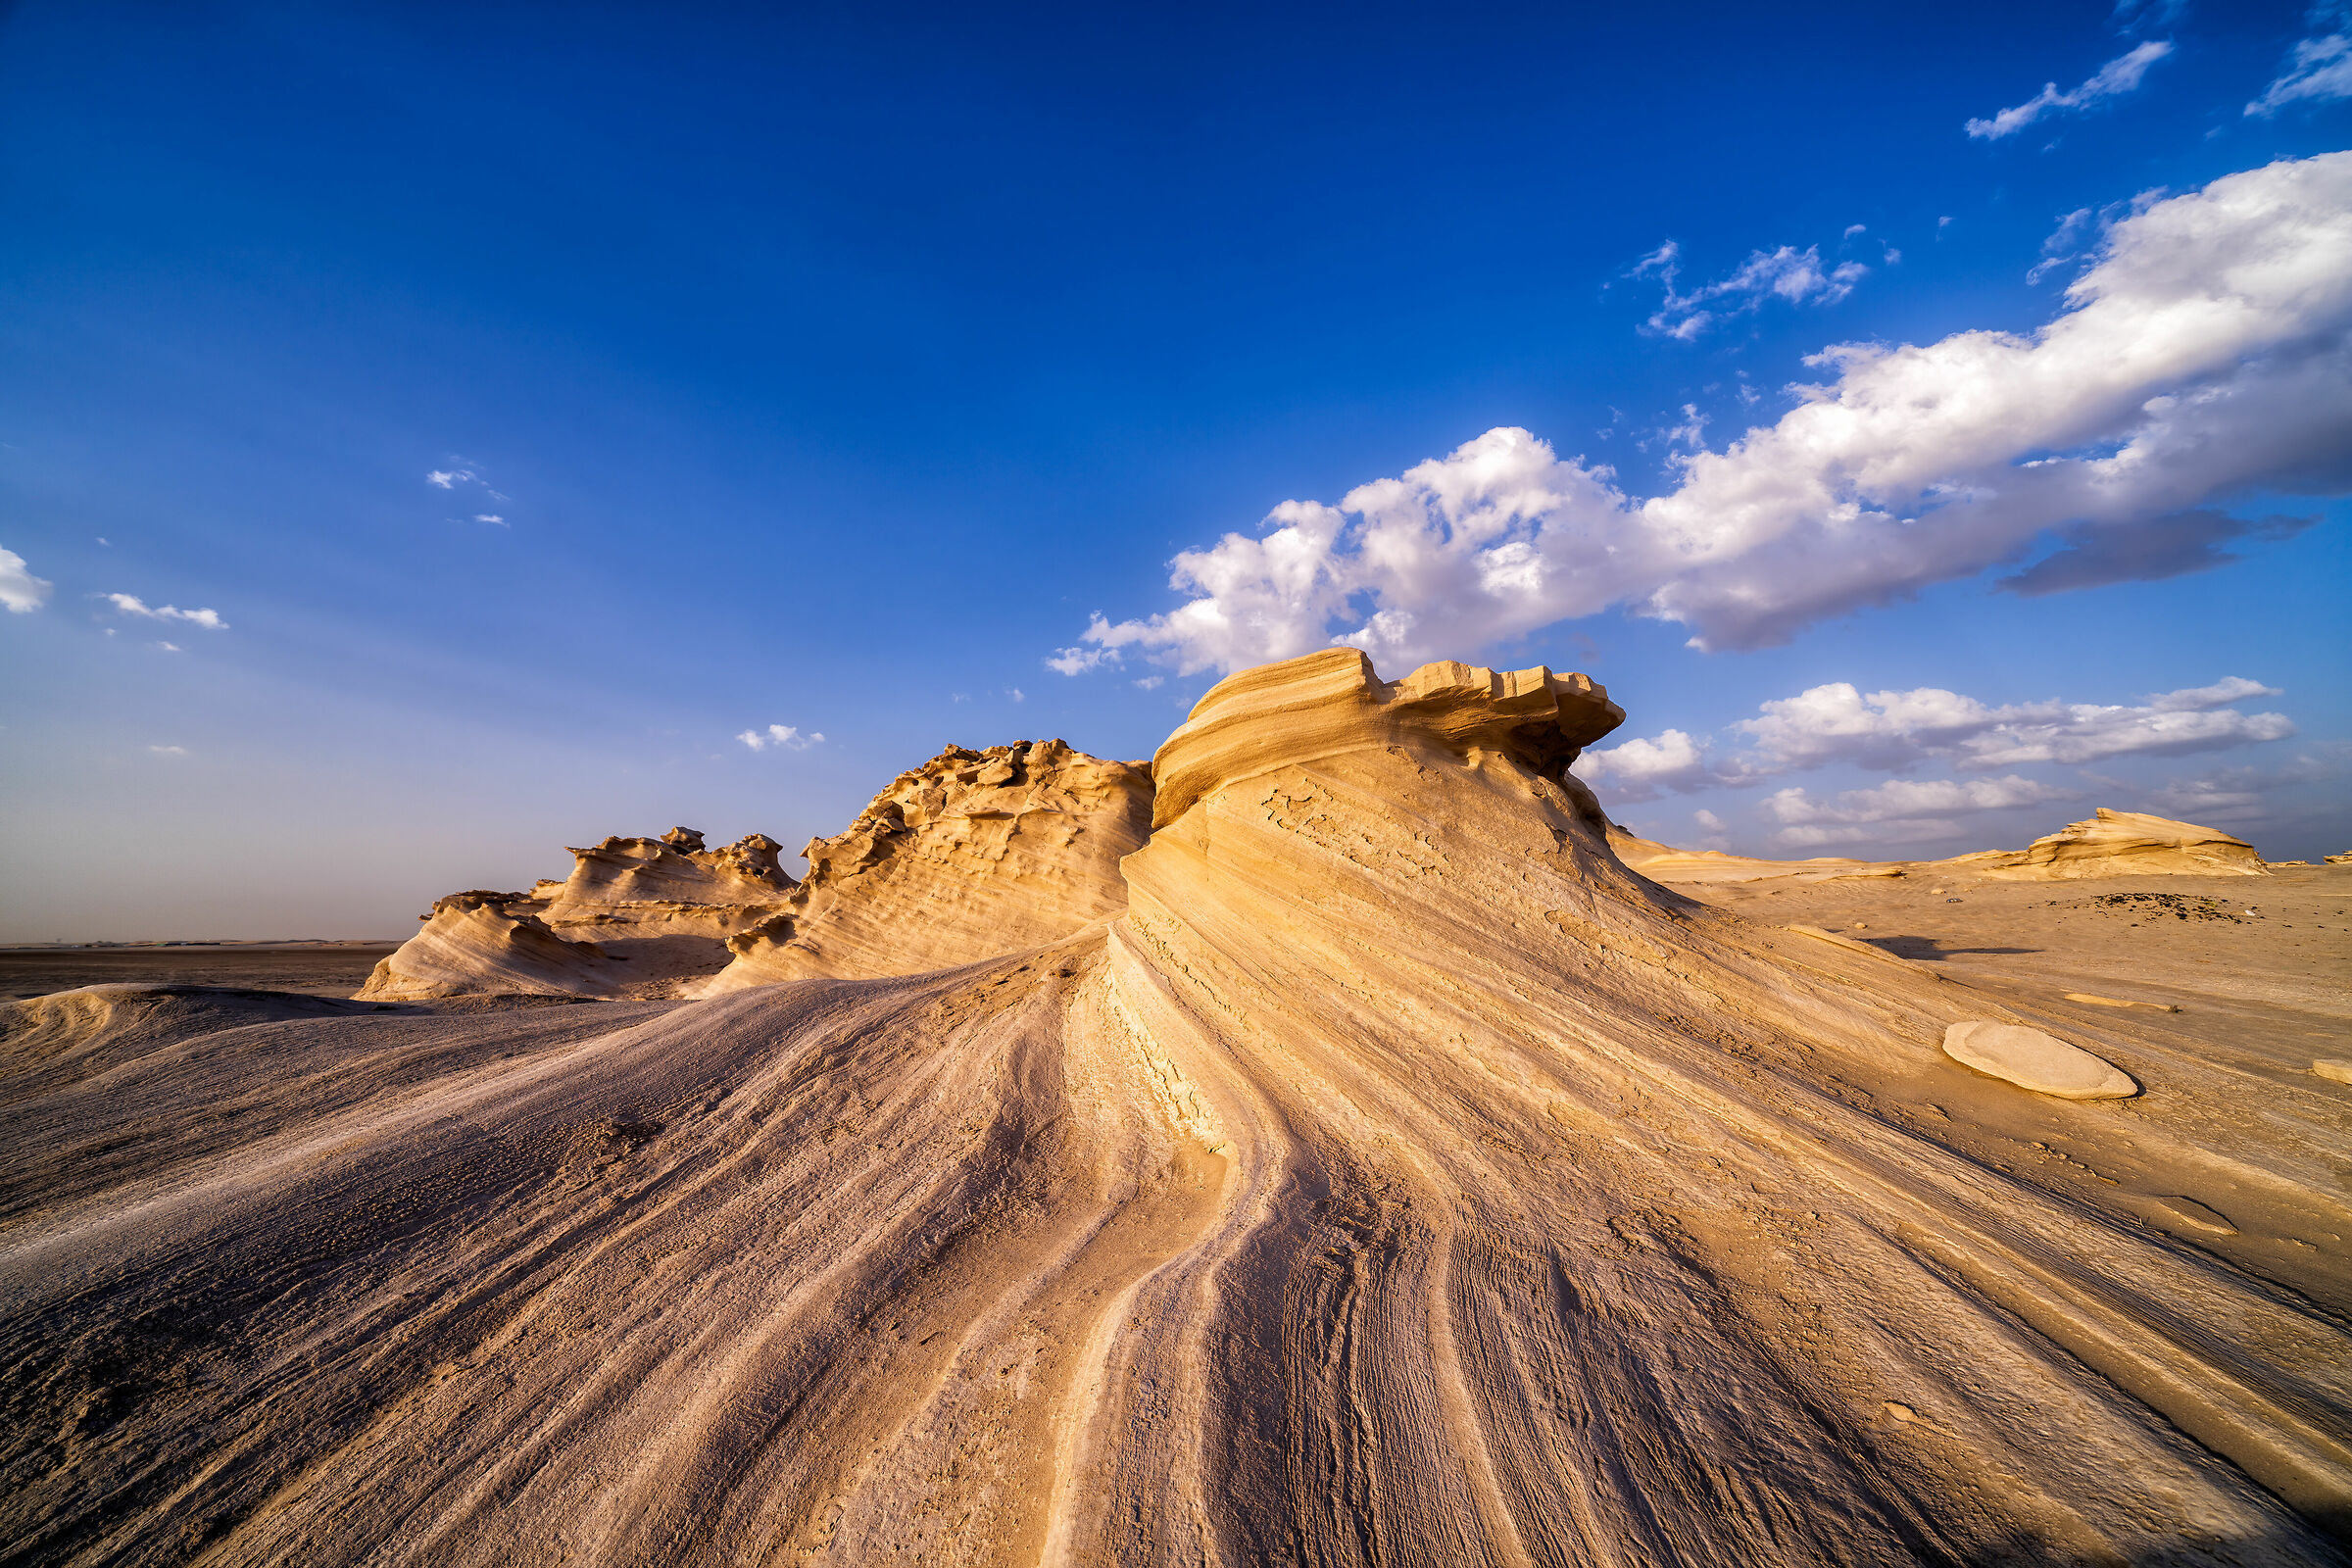 The fossil dunes of Al Whatba...